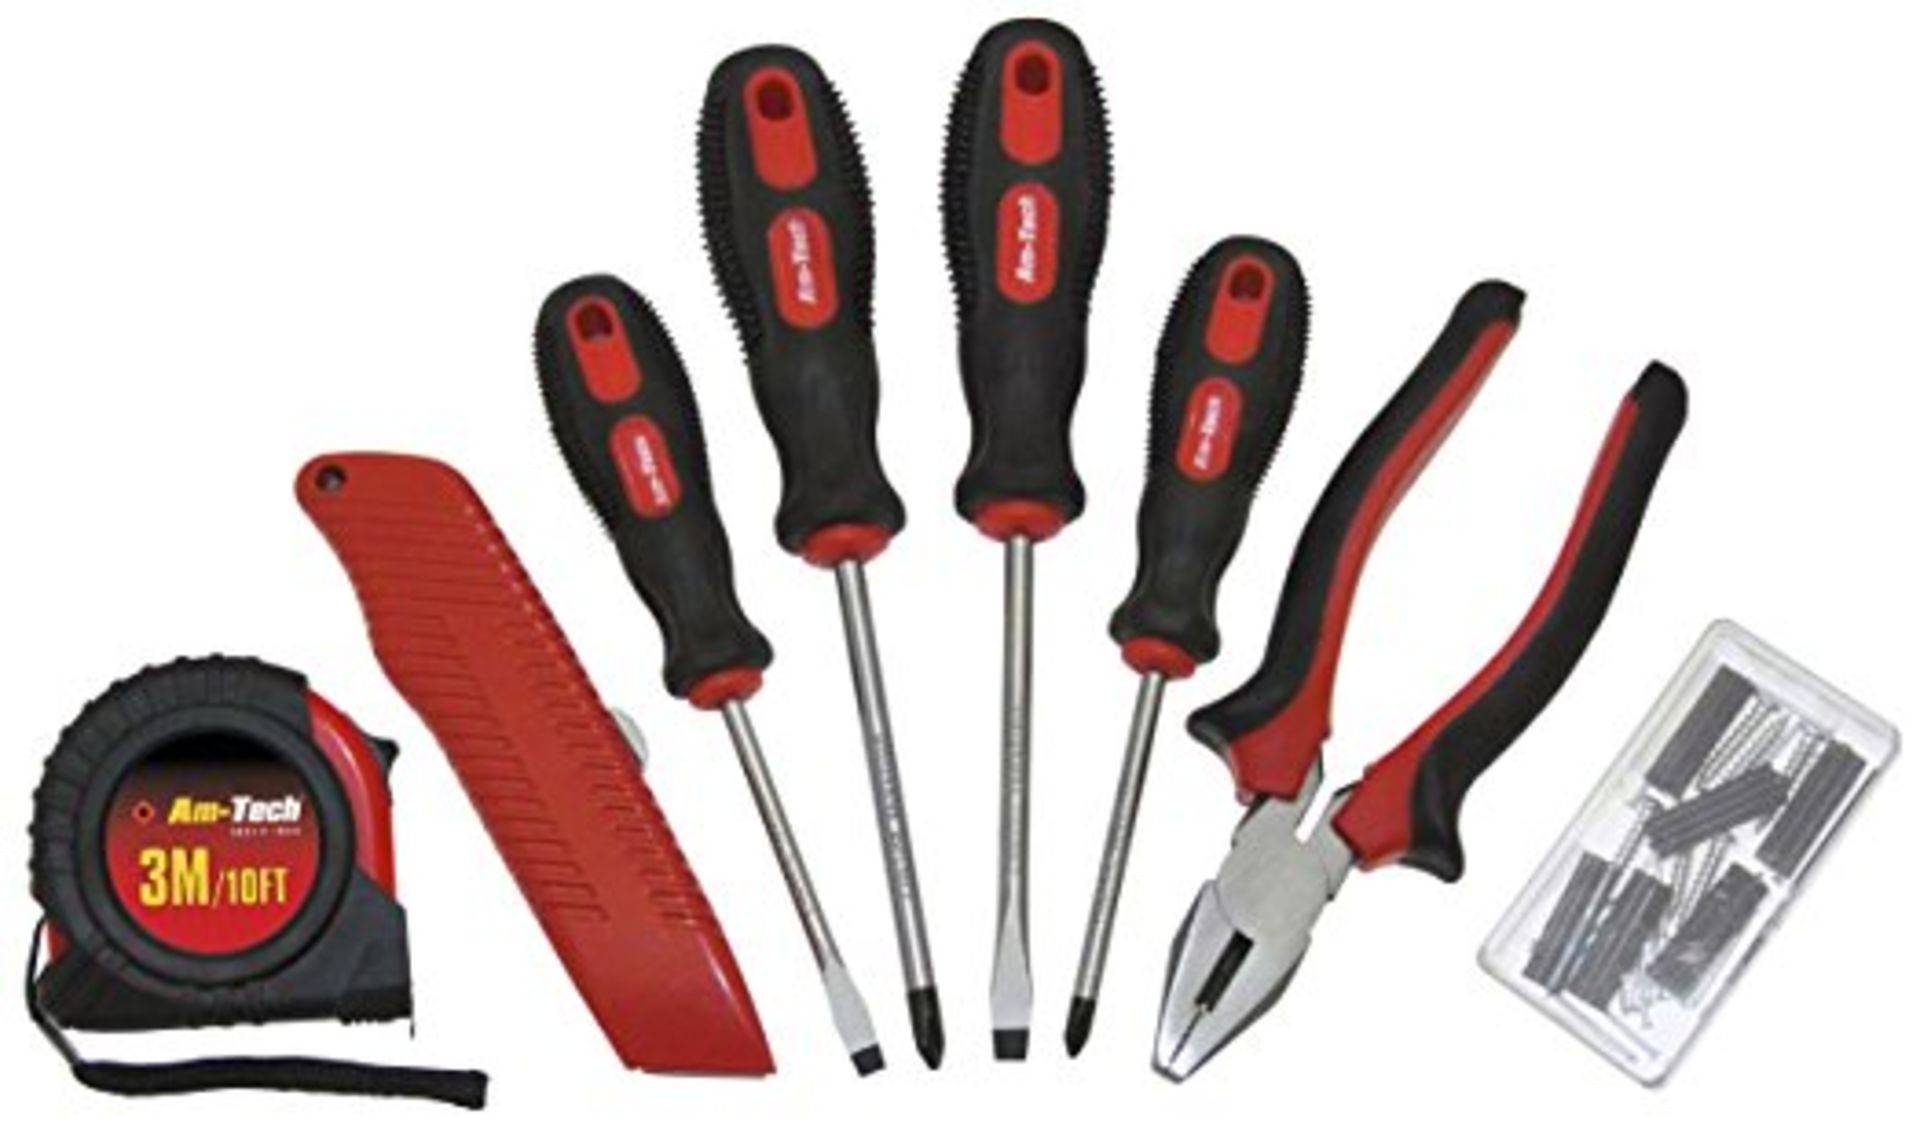 V Brand New Forty Three Piece Household Tool Set Inc Pliers, Screwdrivers Etc